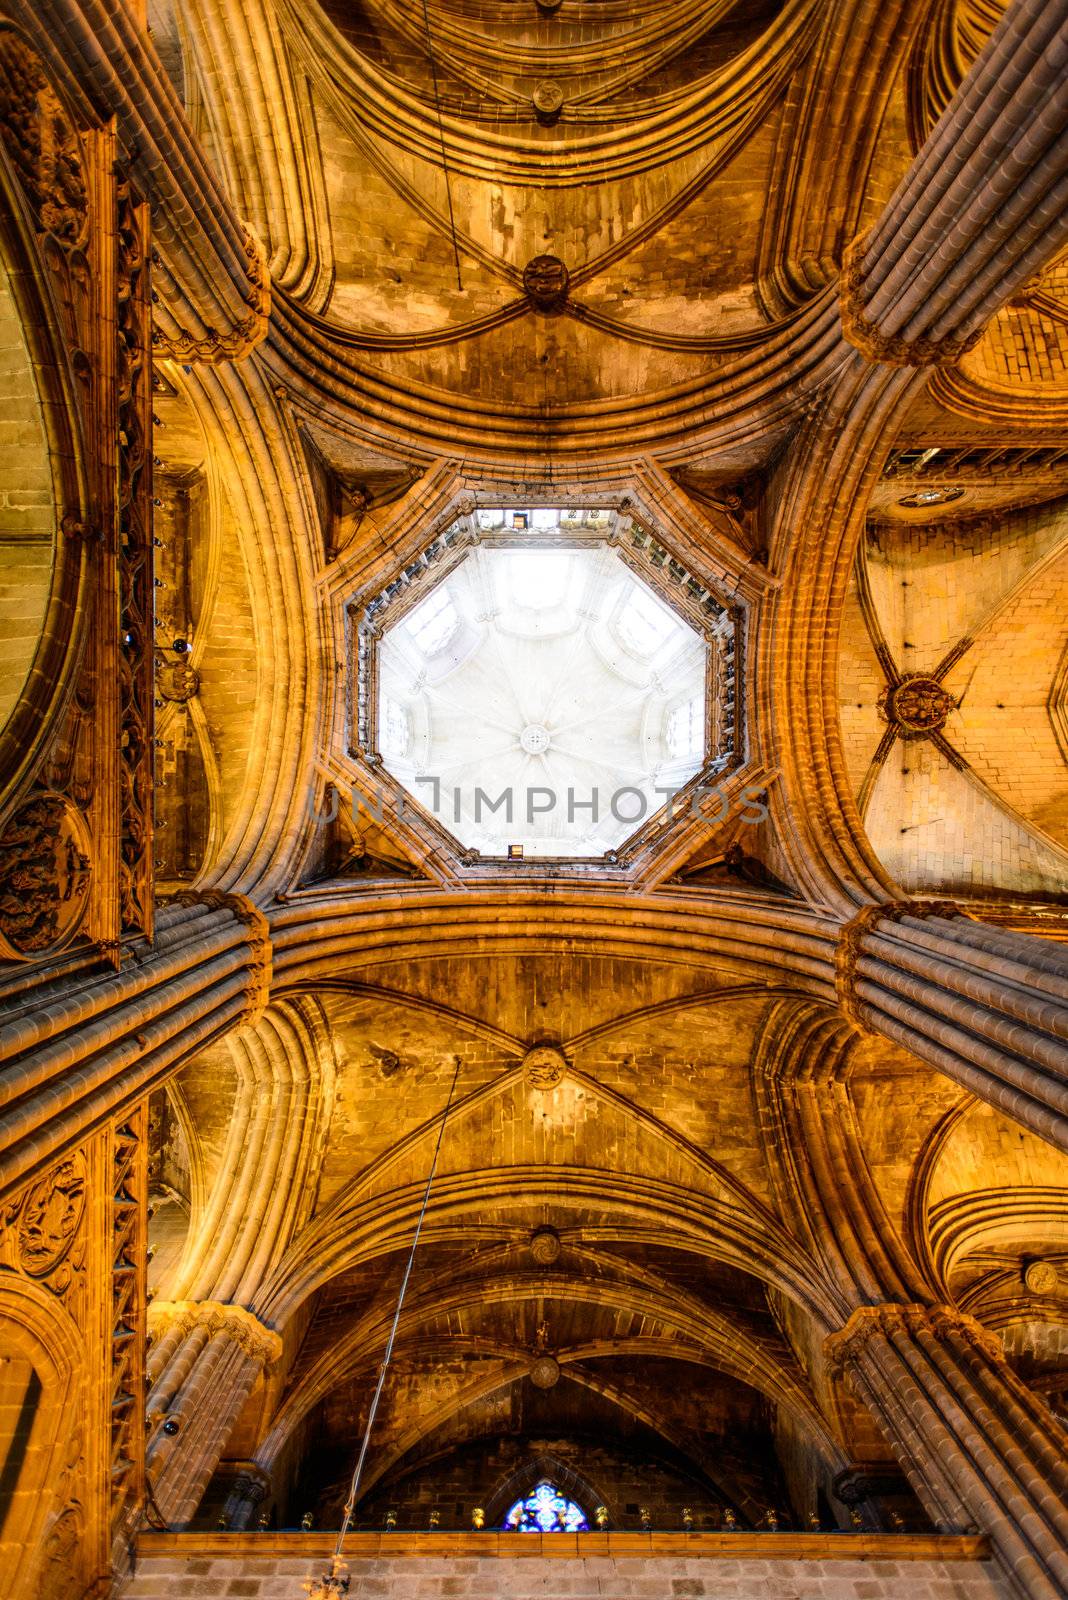 Ceiling the Cathedral of Santa Eulalia in Barcelona's Barri Gotic district.